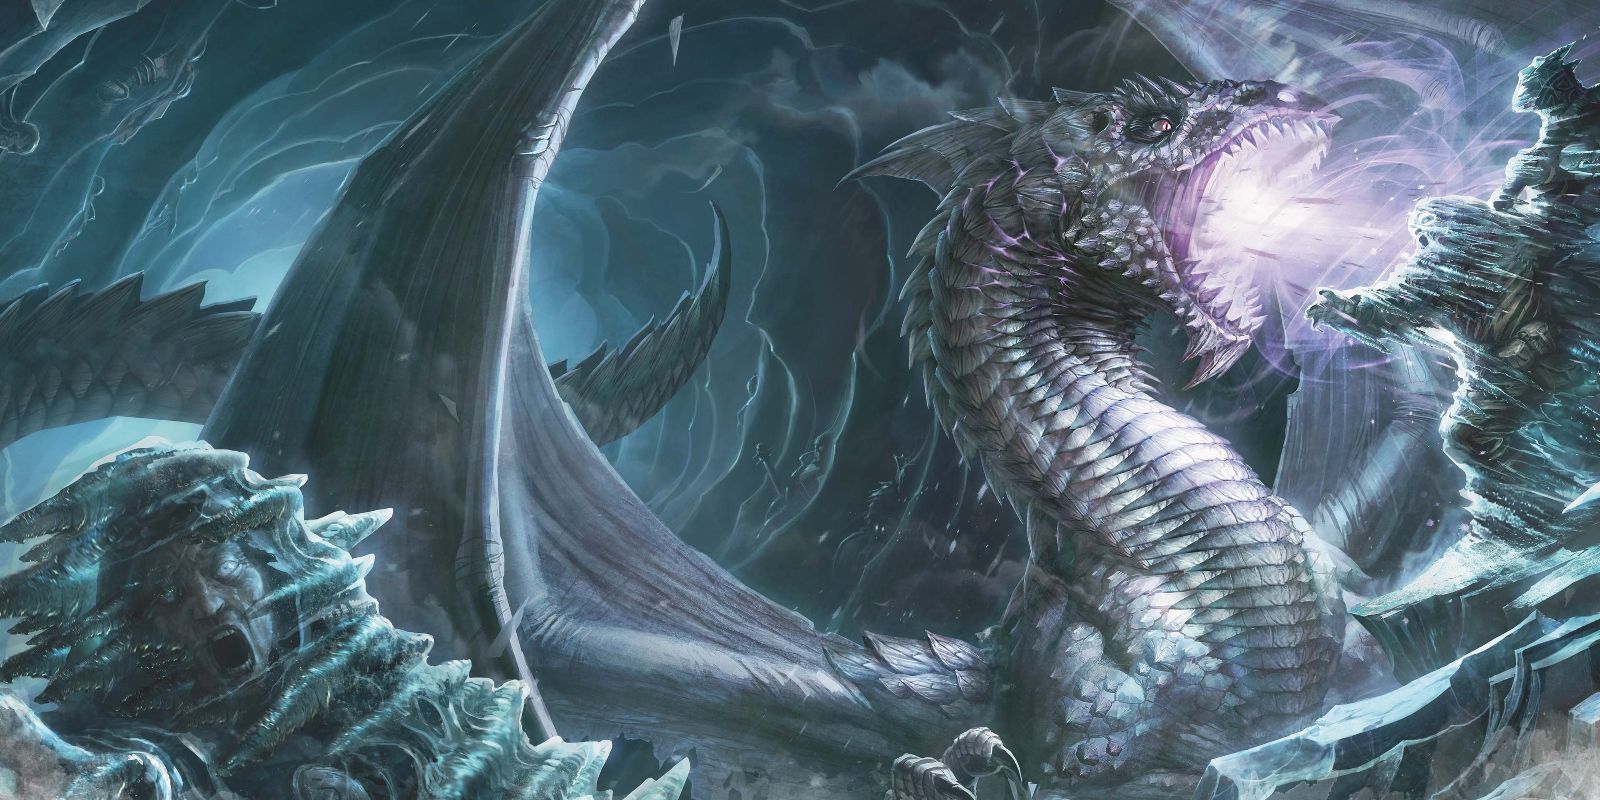 Hoard of the Dragon Queen premade DnD campaign